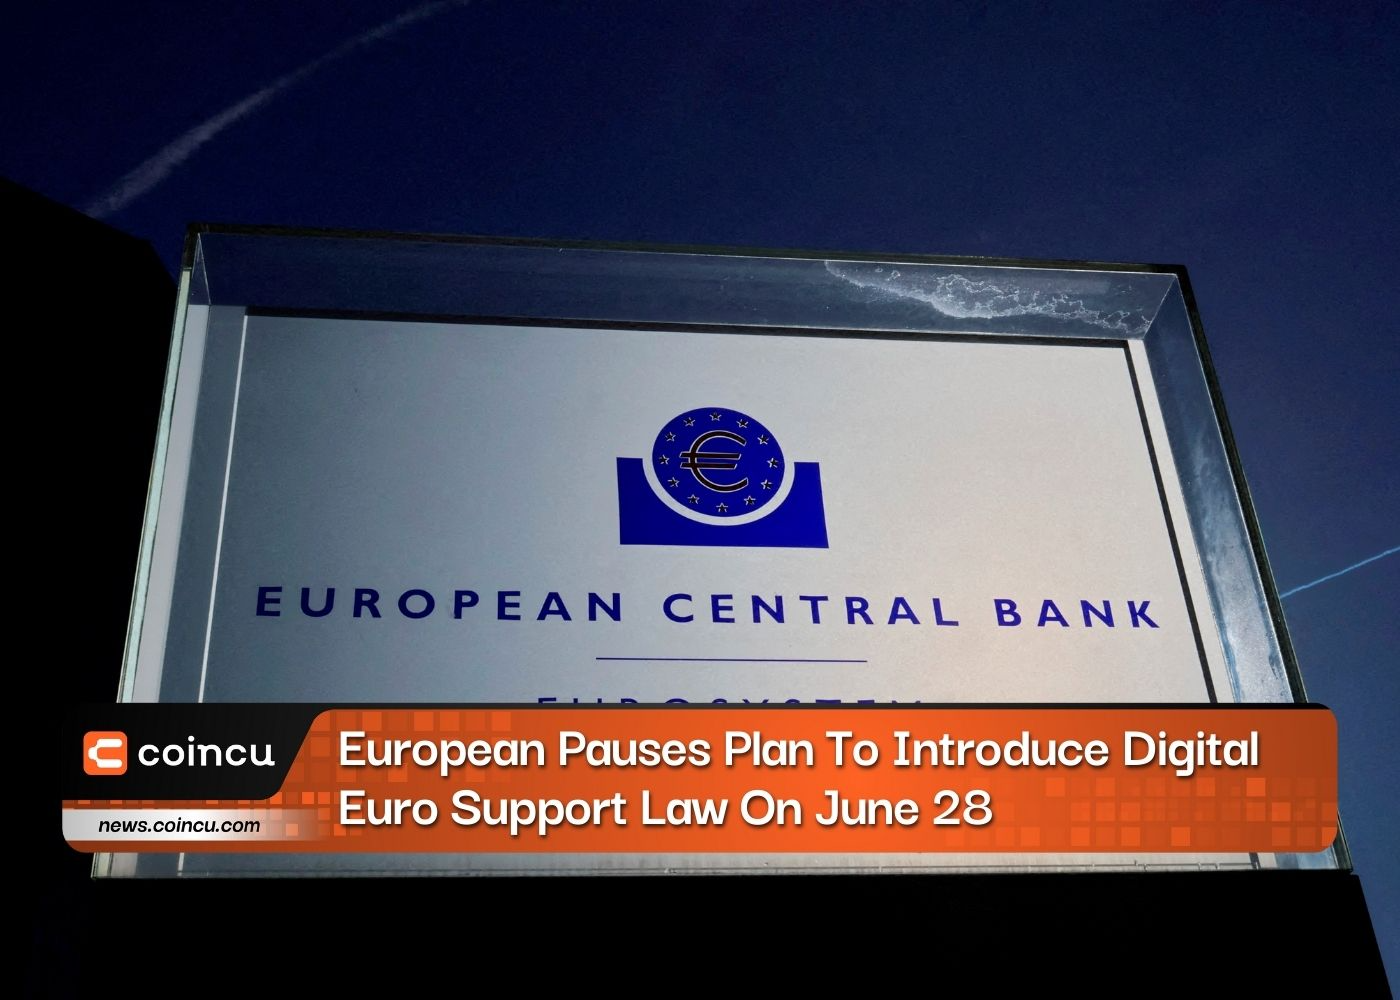 European Pauses Plan To Introduce Digital Euro Support Law On June 28